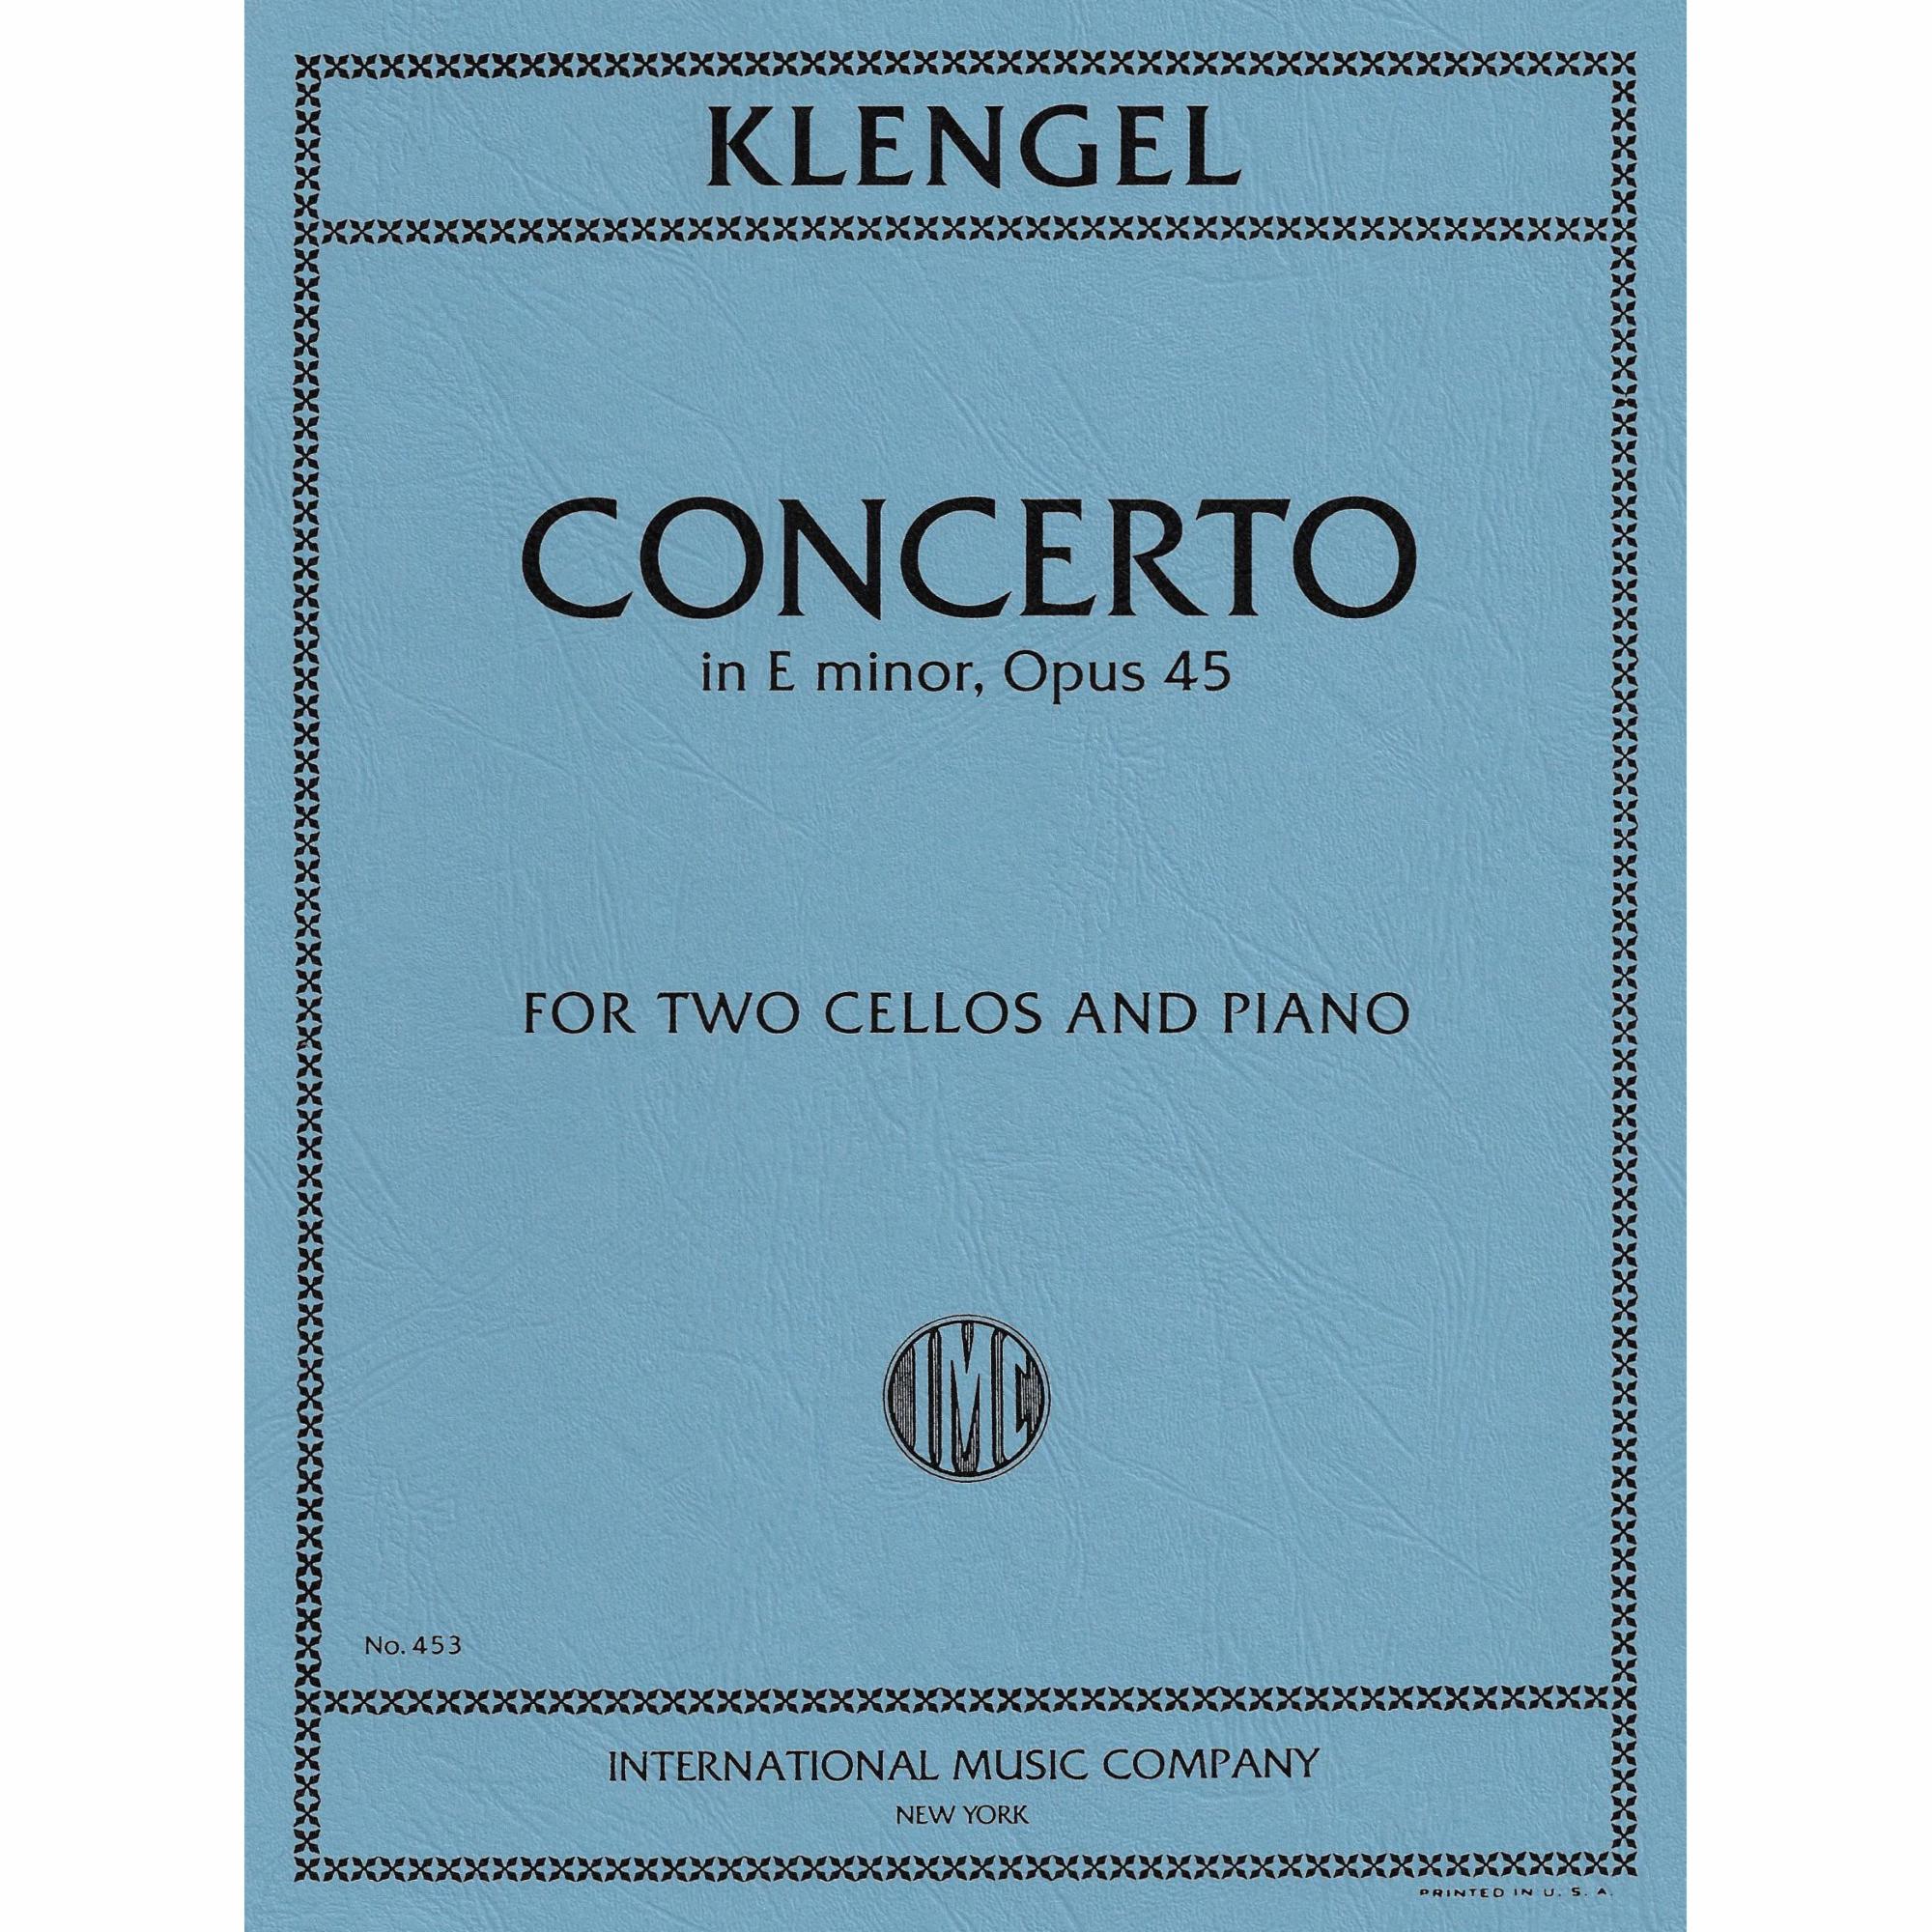 Klengel -- Concerto in E Minor, Op. 45 for Two Cellos and Piano